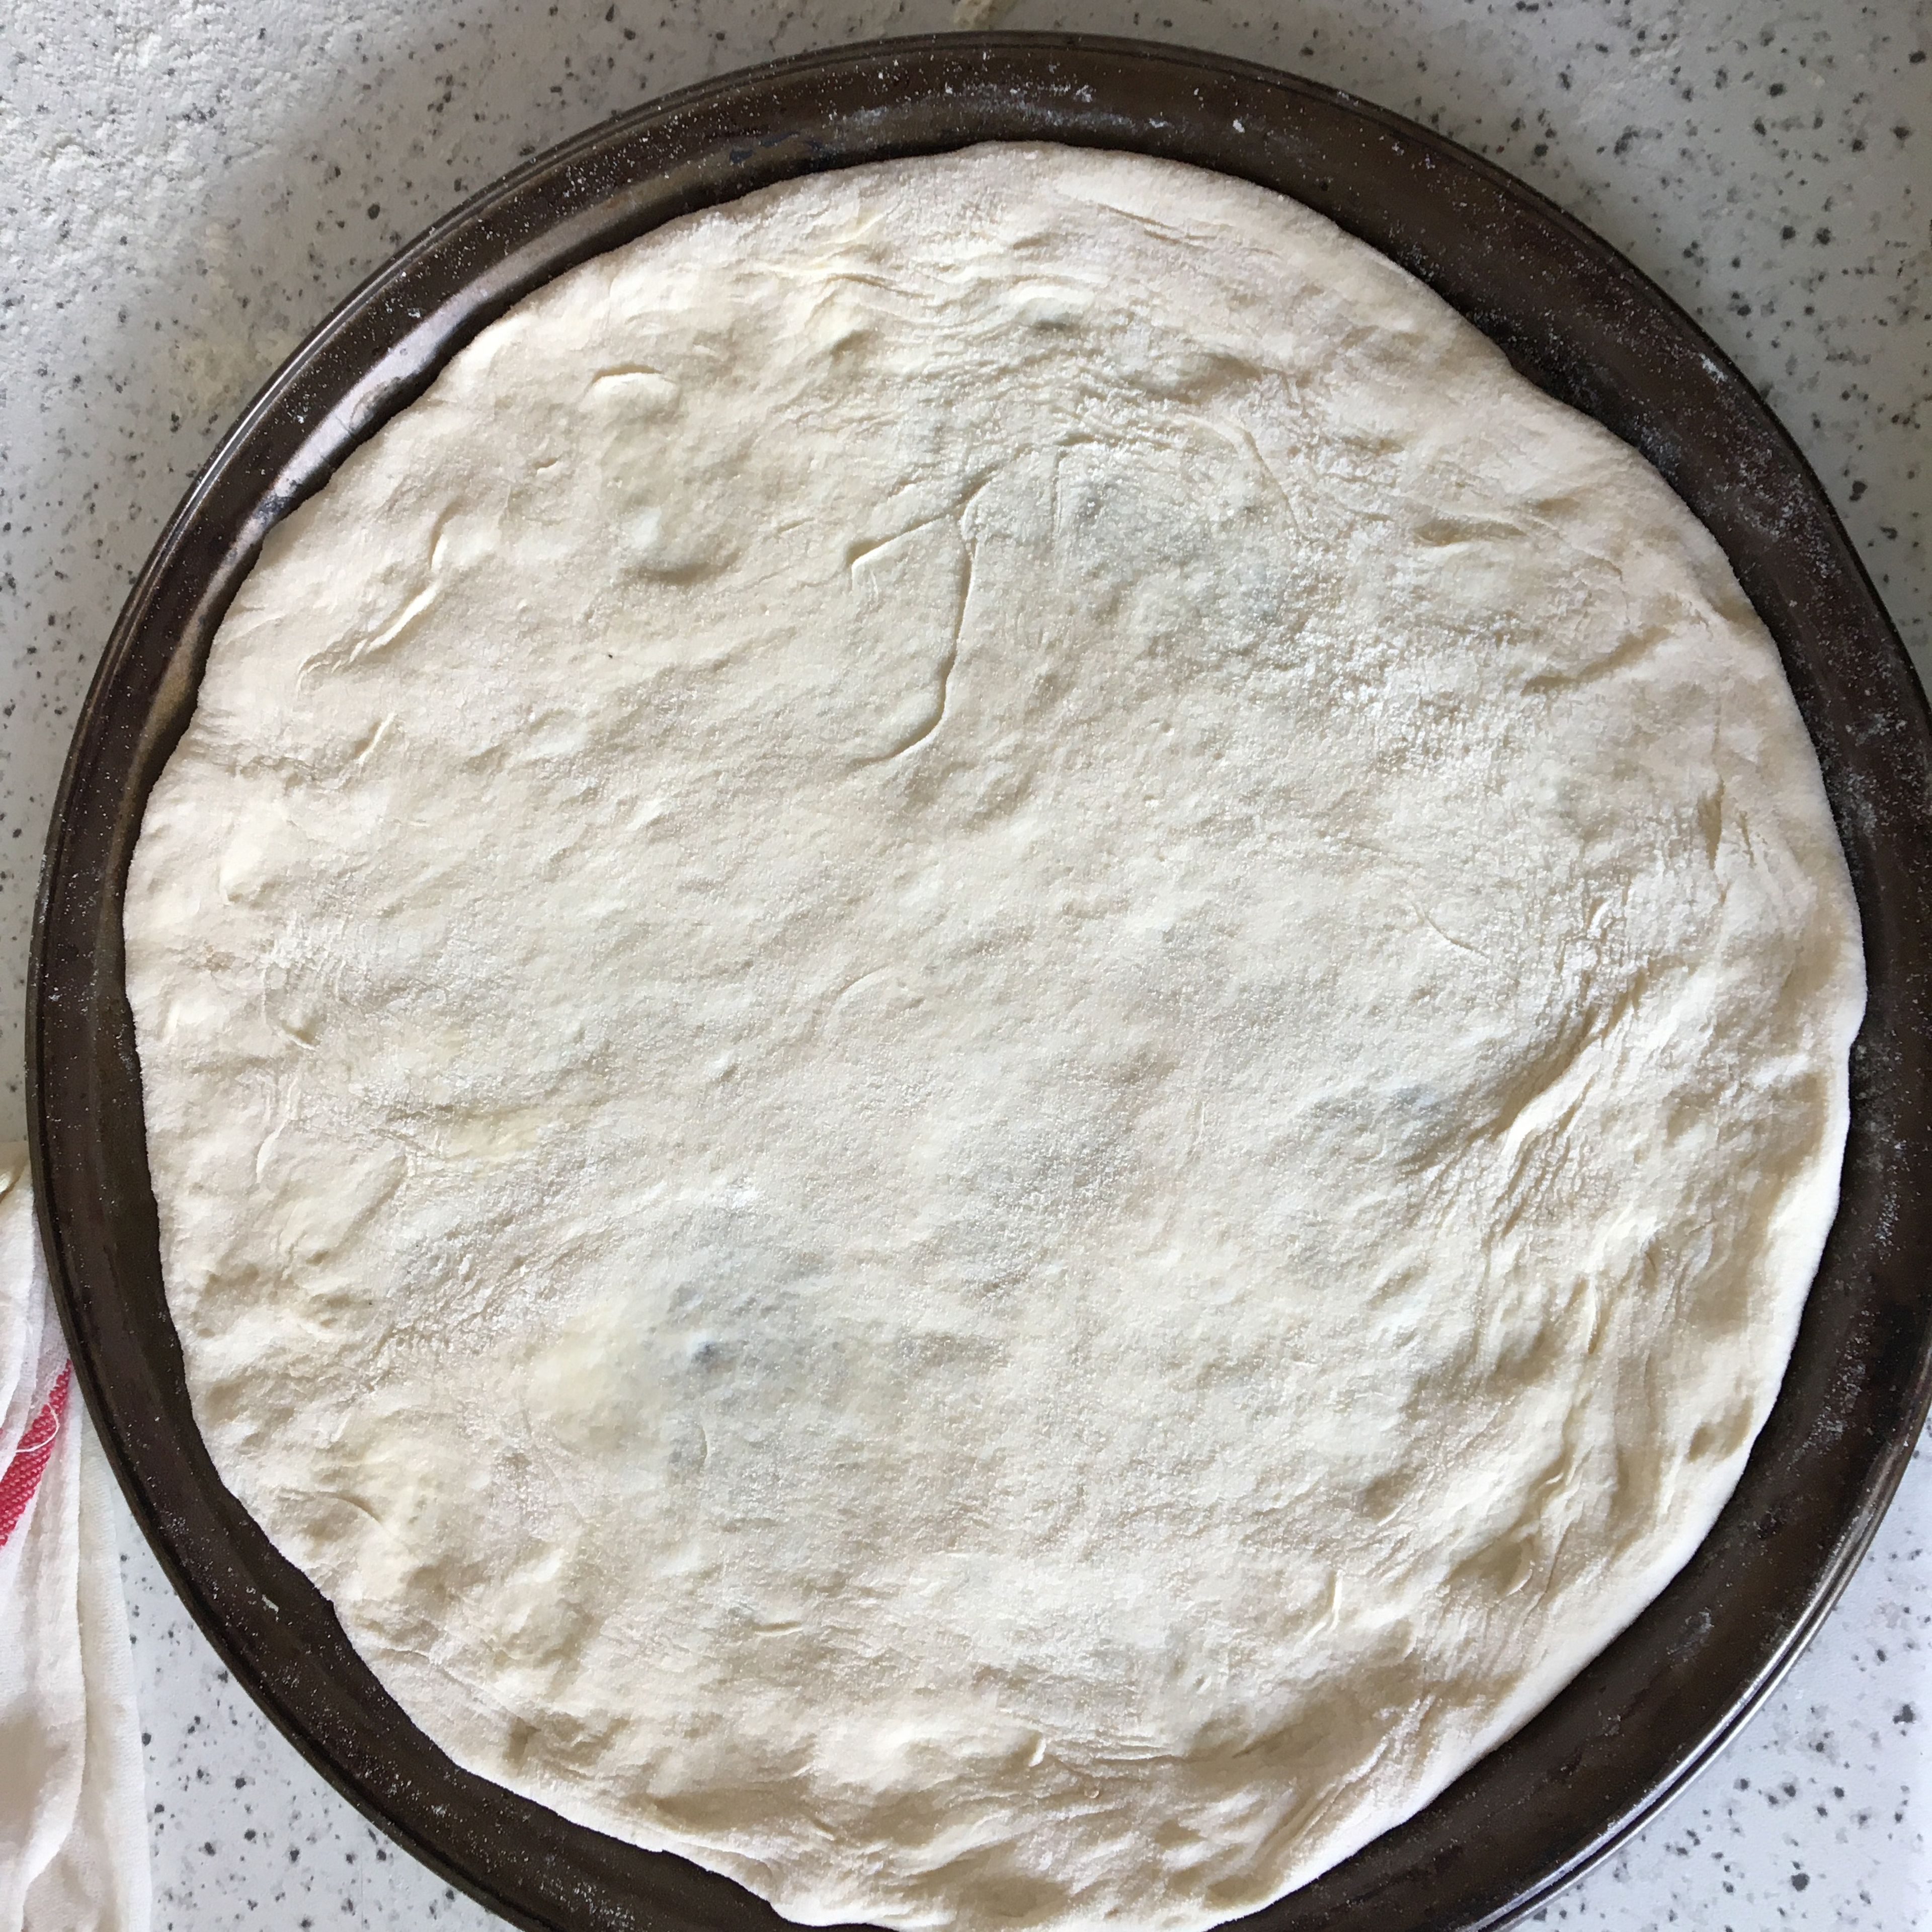 When the dough is ready, lightly grease two baking dishes. Transfer one of dough pieces onto the baking dish, letting it stretch over your hands by its own weight. Adjust into the dish and shape the rounds.